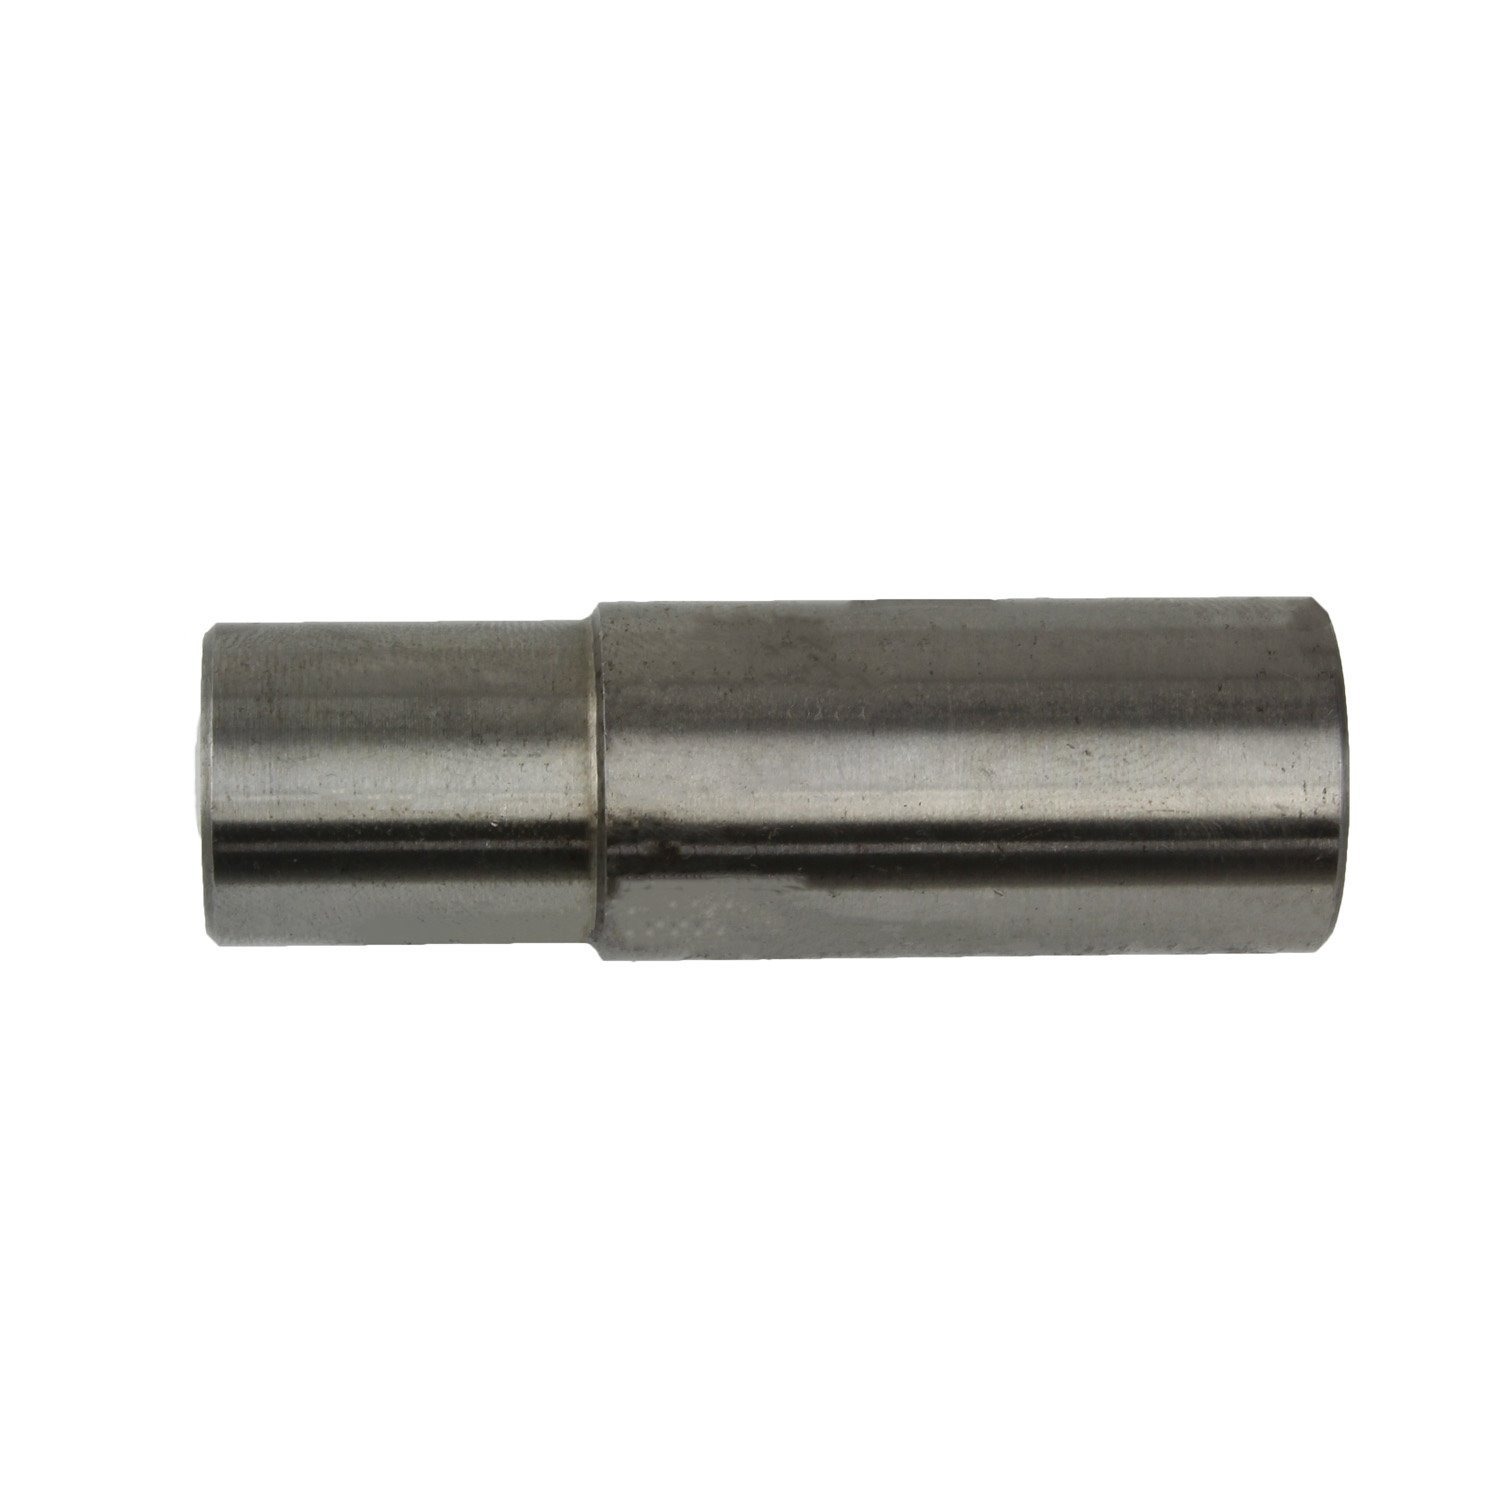 DIFFERENTIAL PINION SHAFT